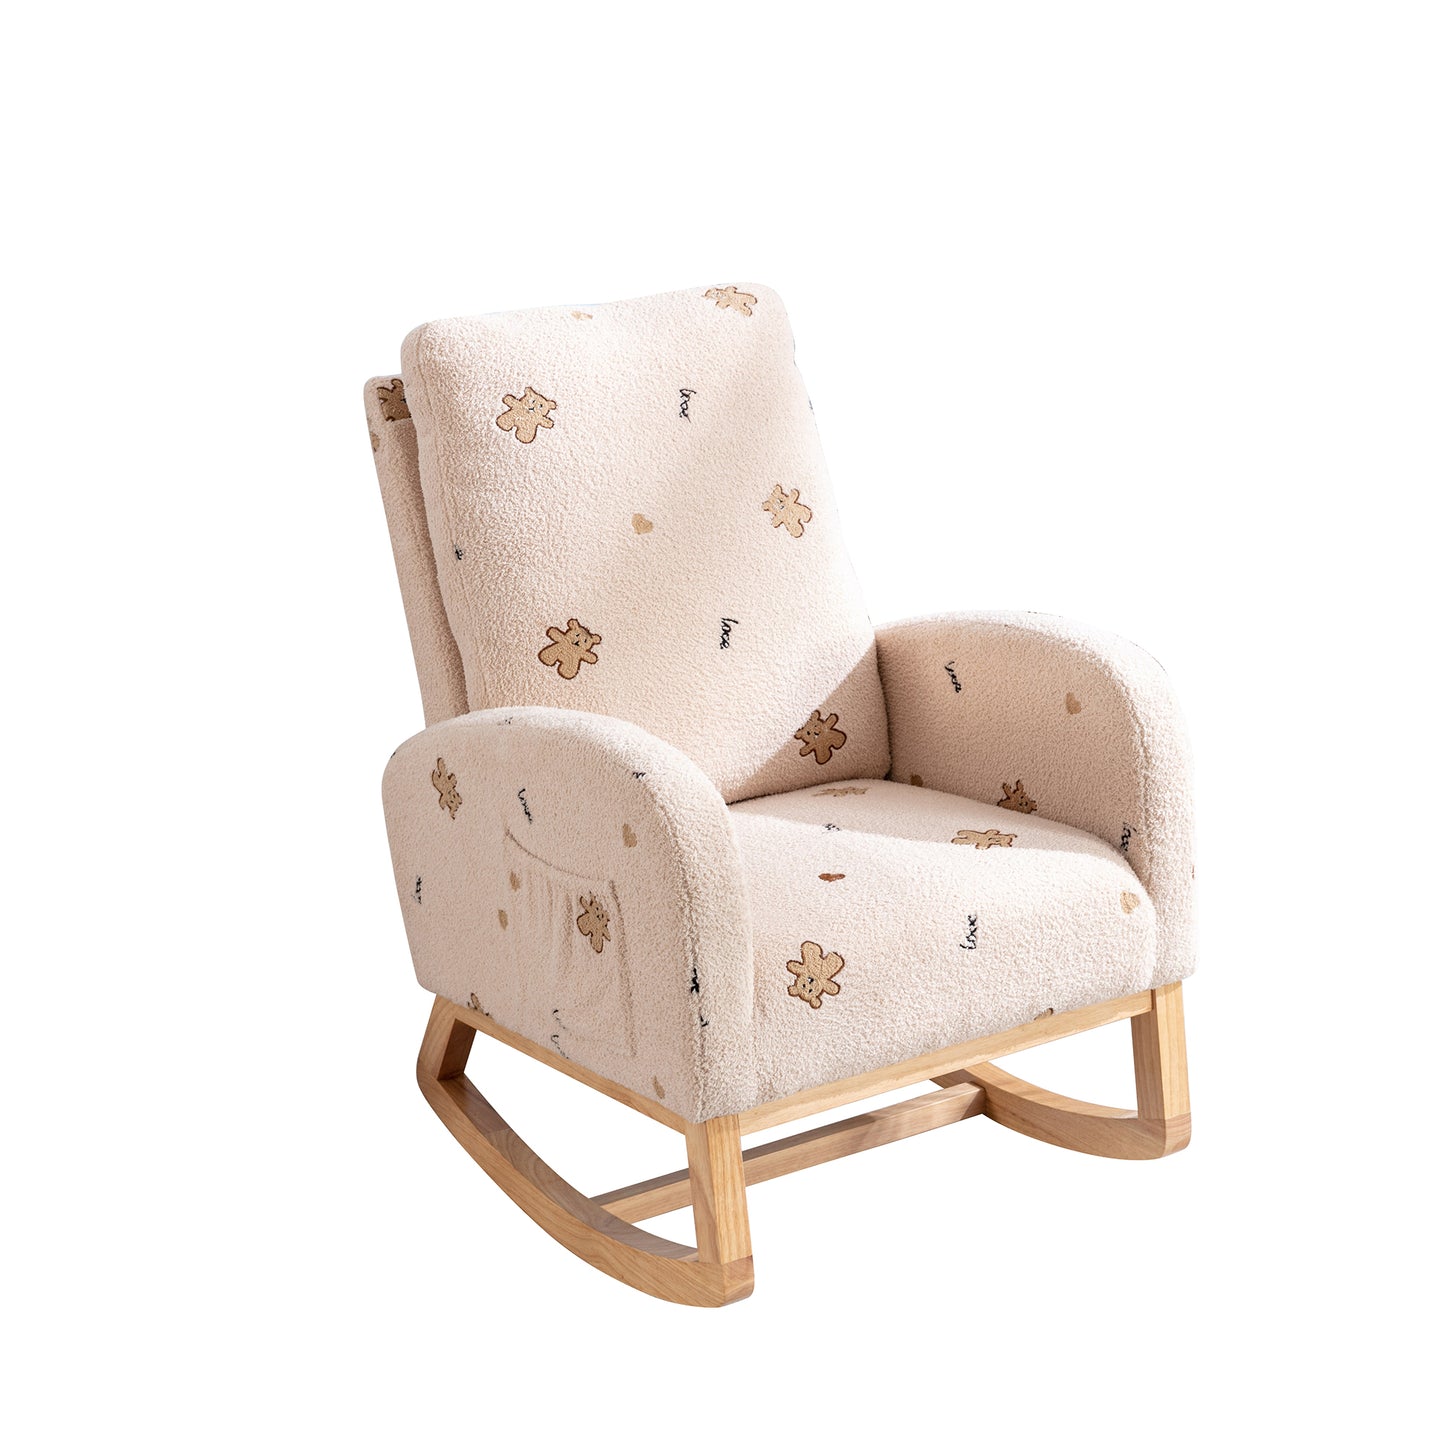 26.8"W Modern Rocking Chair for Nursery, Mid Century Accent Rocker Armchair With Side Pocket, Upholstered High Back Wooden Rocking Chair for Living Room Baby Kids Room Bedroom, Beige Boucle